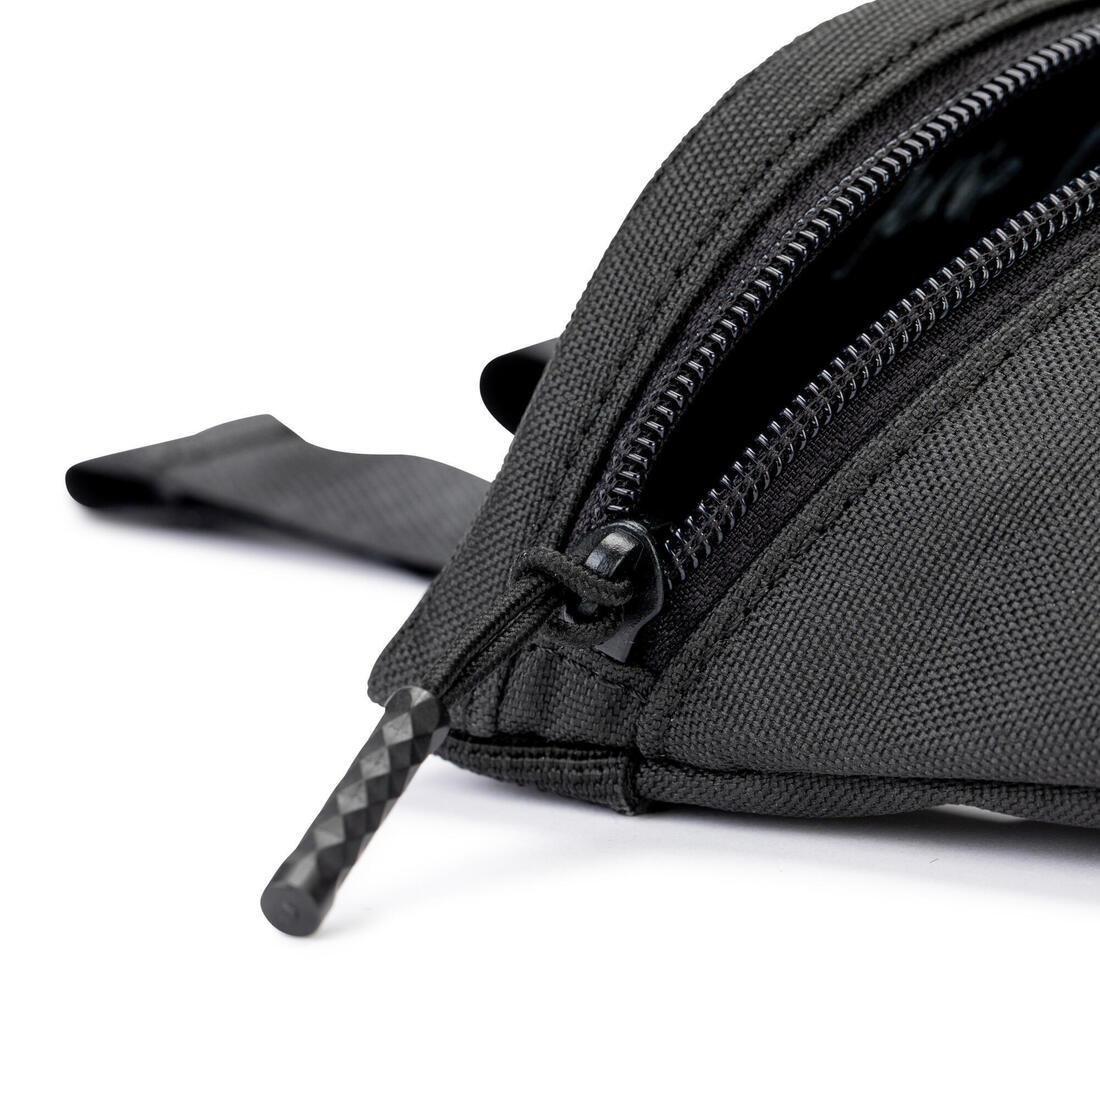 OXELO - Scooter Bag 100, Black